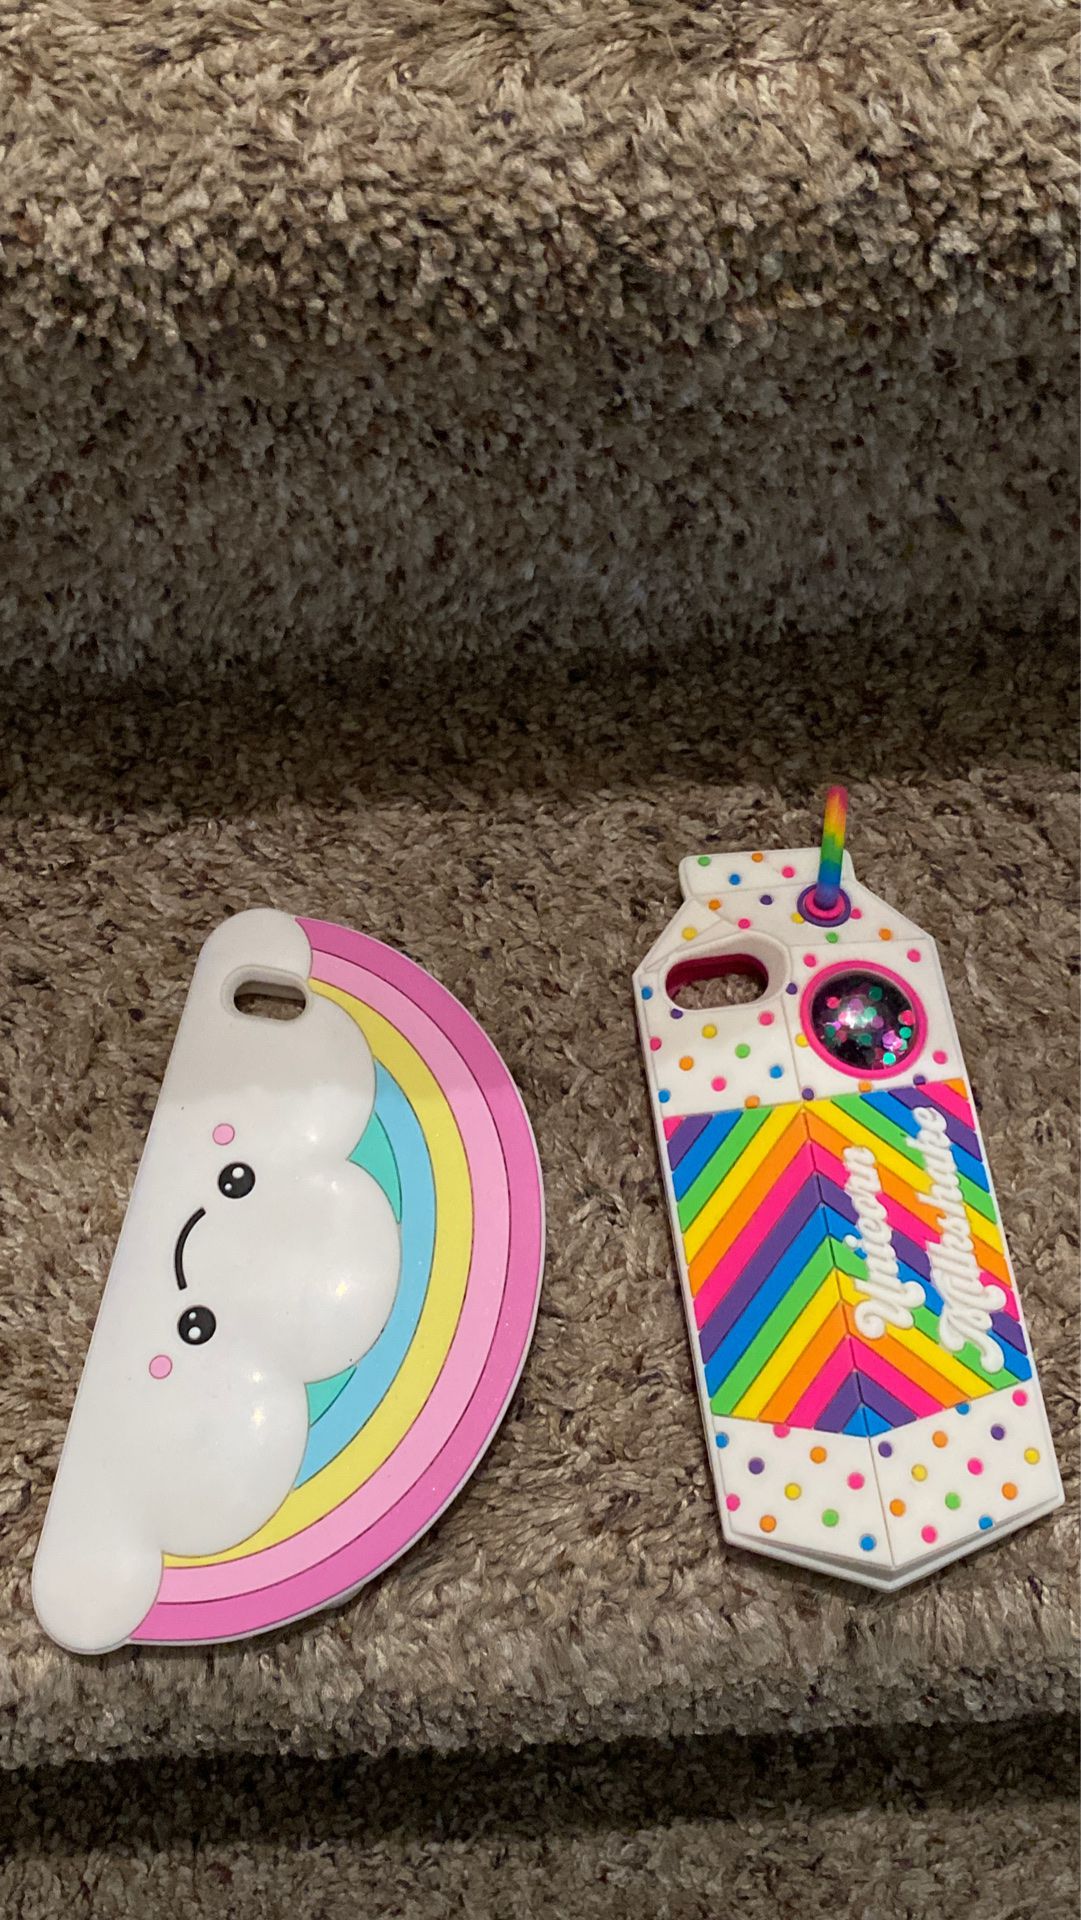 2 iPhone 6s cases from Claire’s for $12